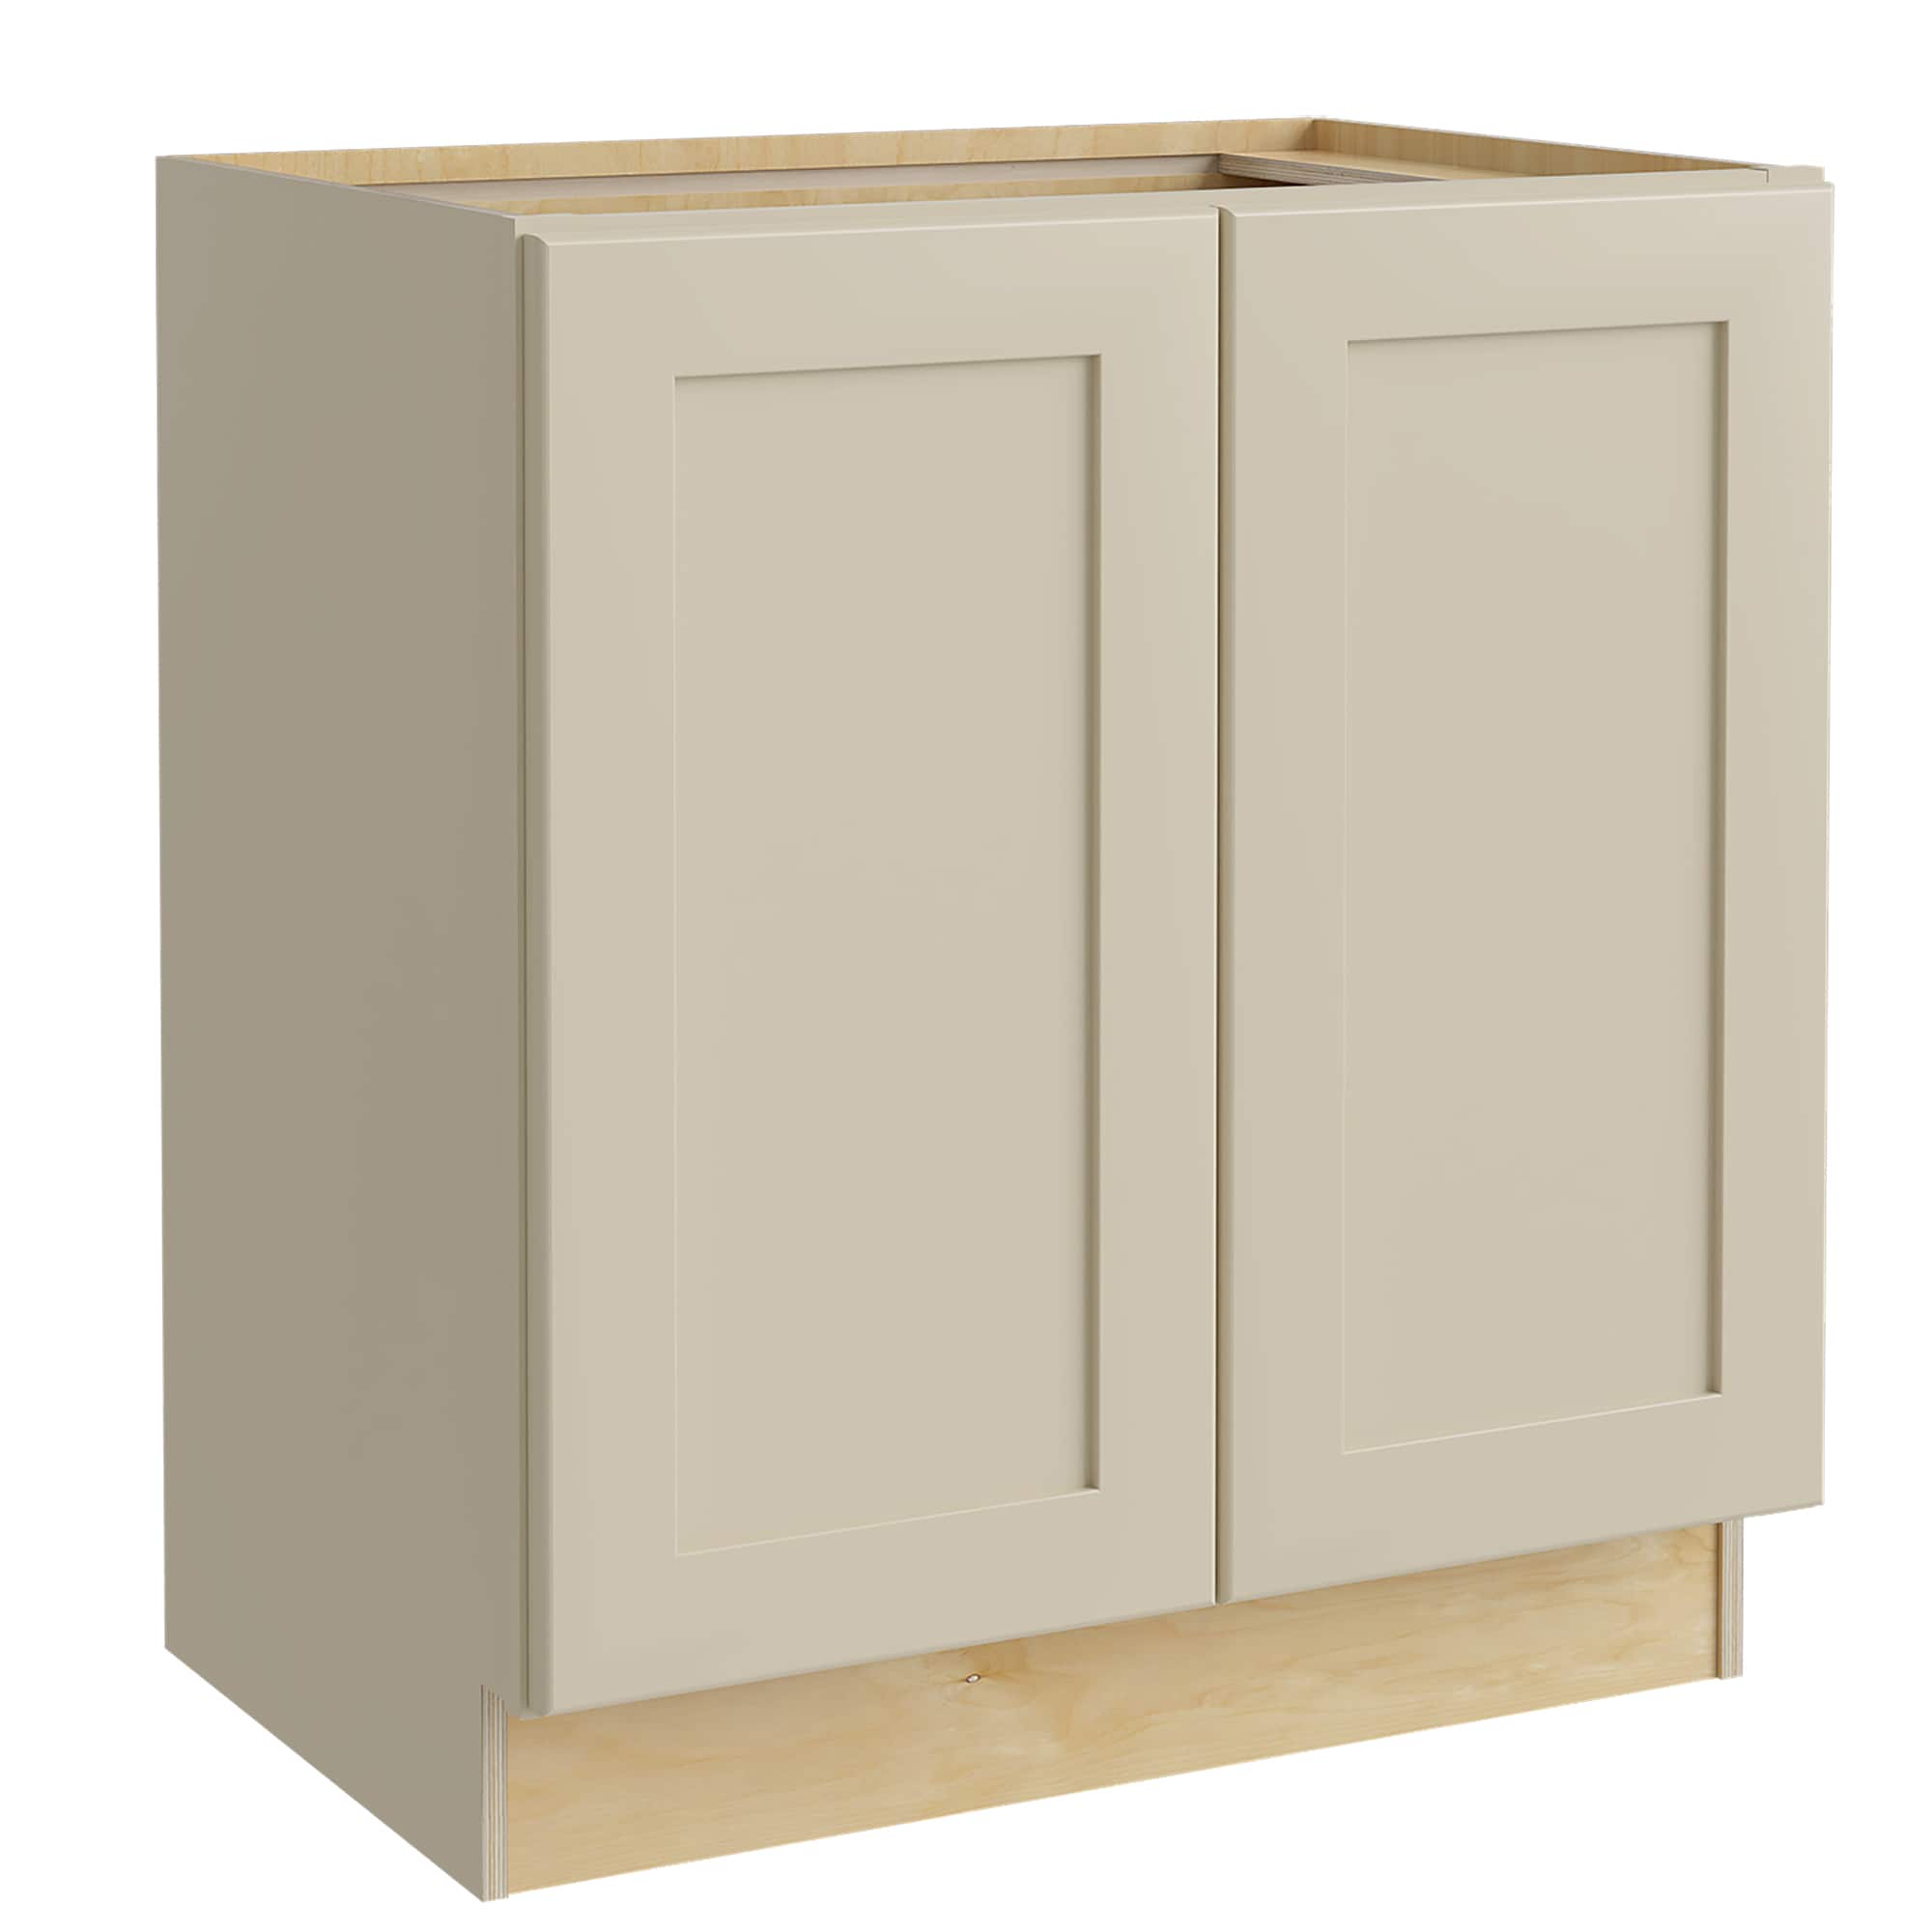 Luxxe Cabinetry 27-in W x 34.5-in H x 21-in D Norfolk Blended Cream Painted Door Base Fully Assembled Semi-custom Cabinet in Off-White | VB2721FH-NBC